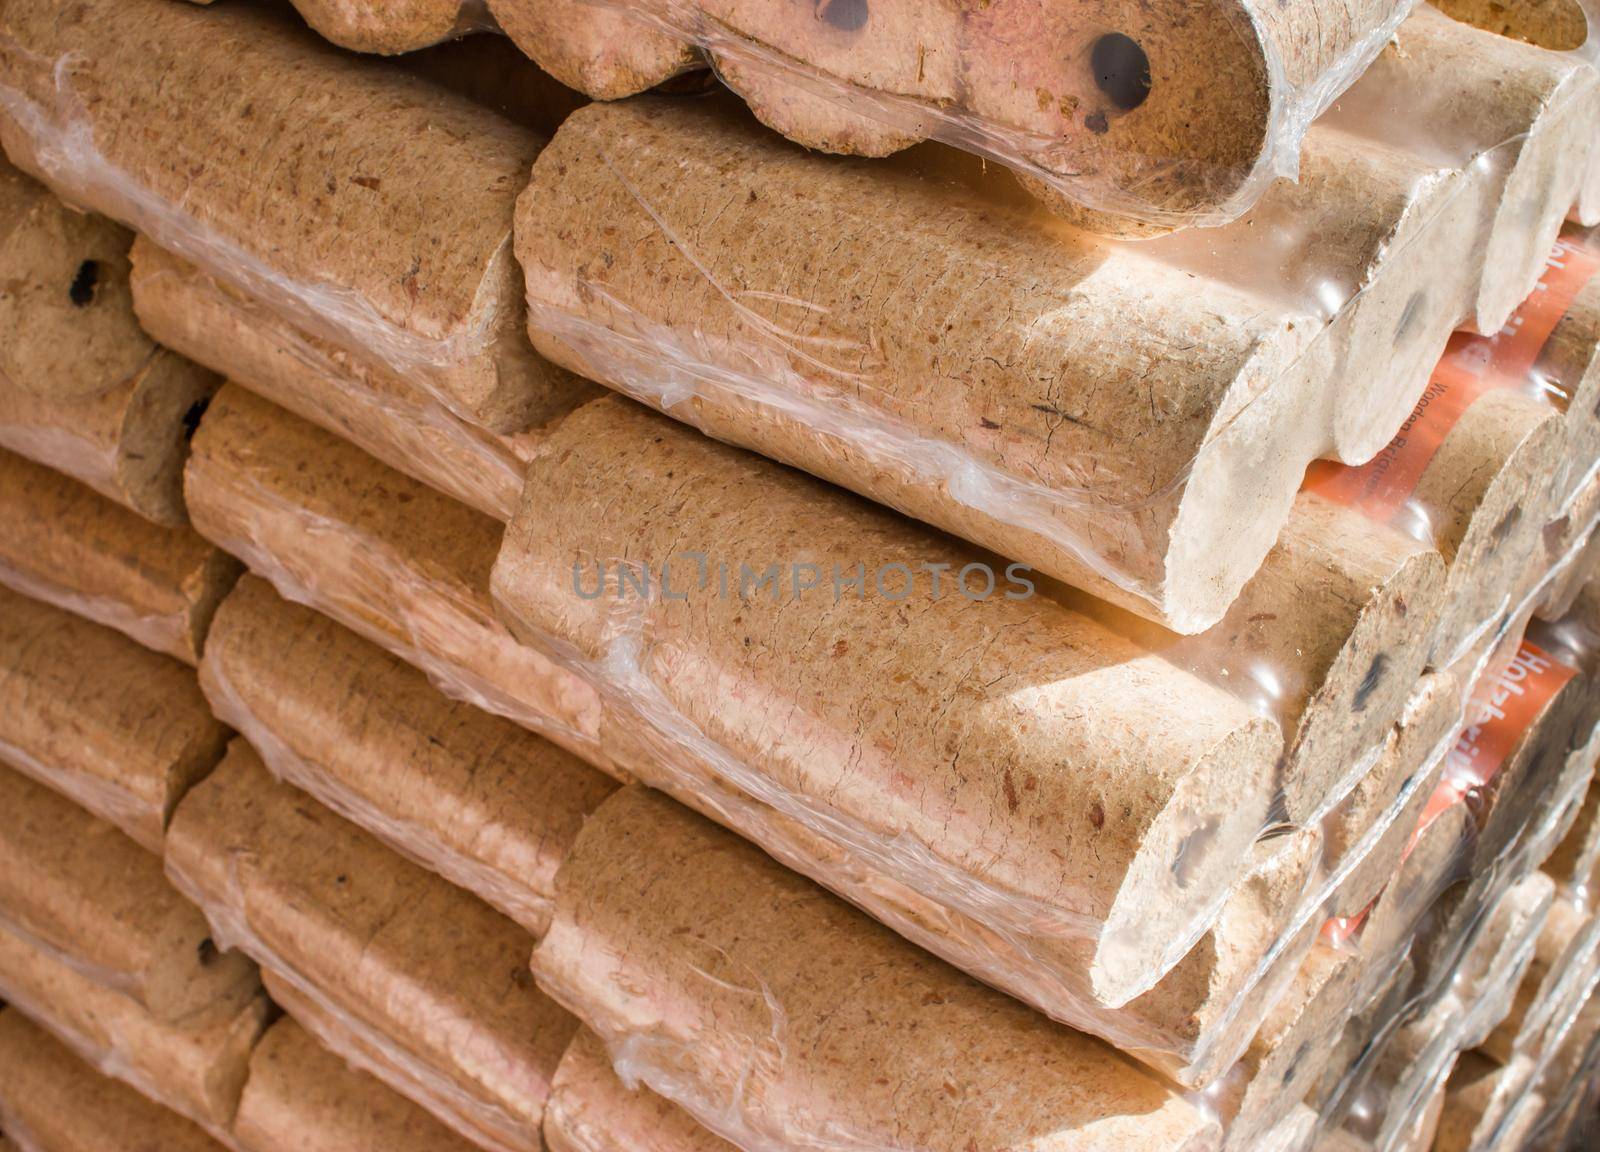 Fire briquettes for heating: Stacked firewood packed in plastic by Daxenbichler